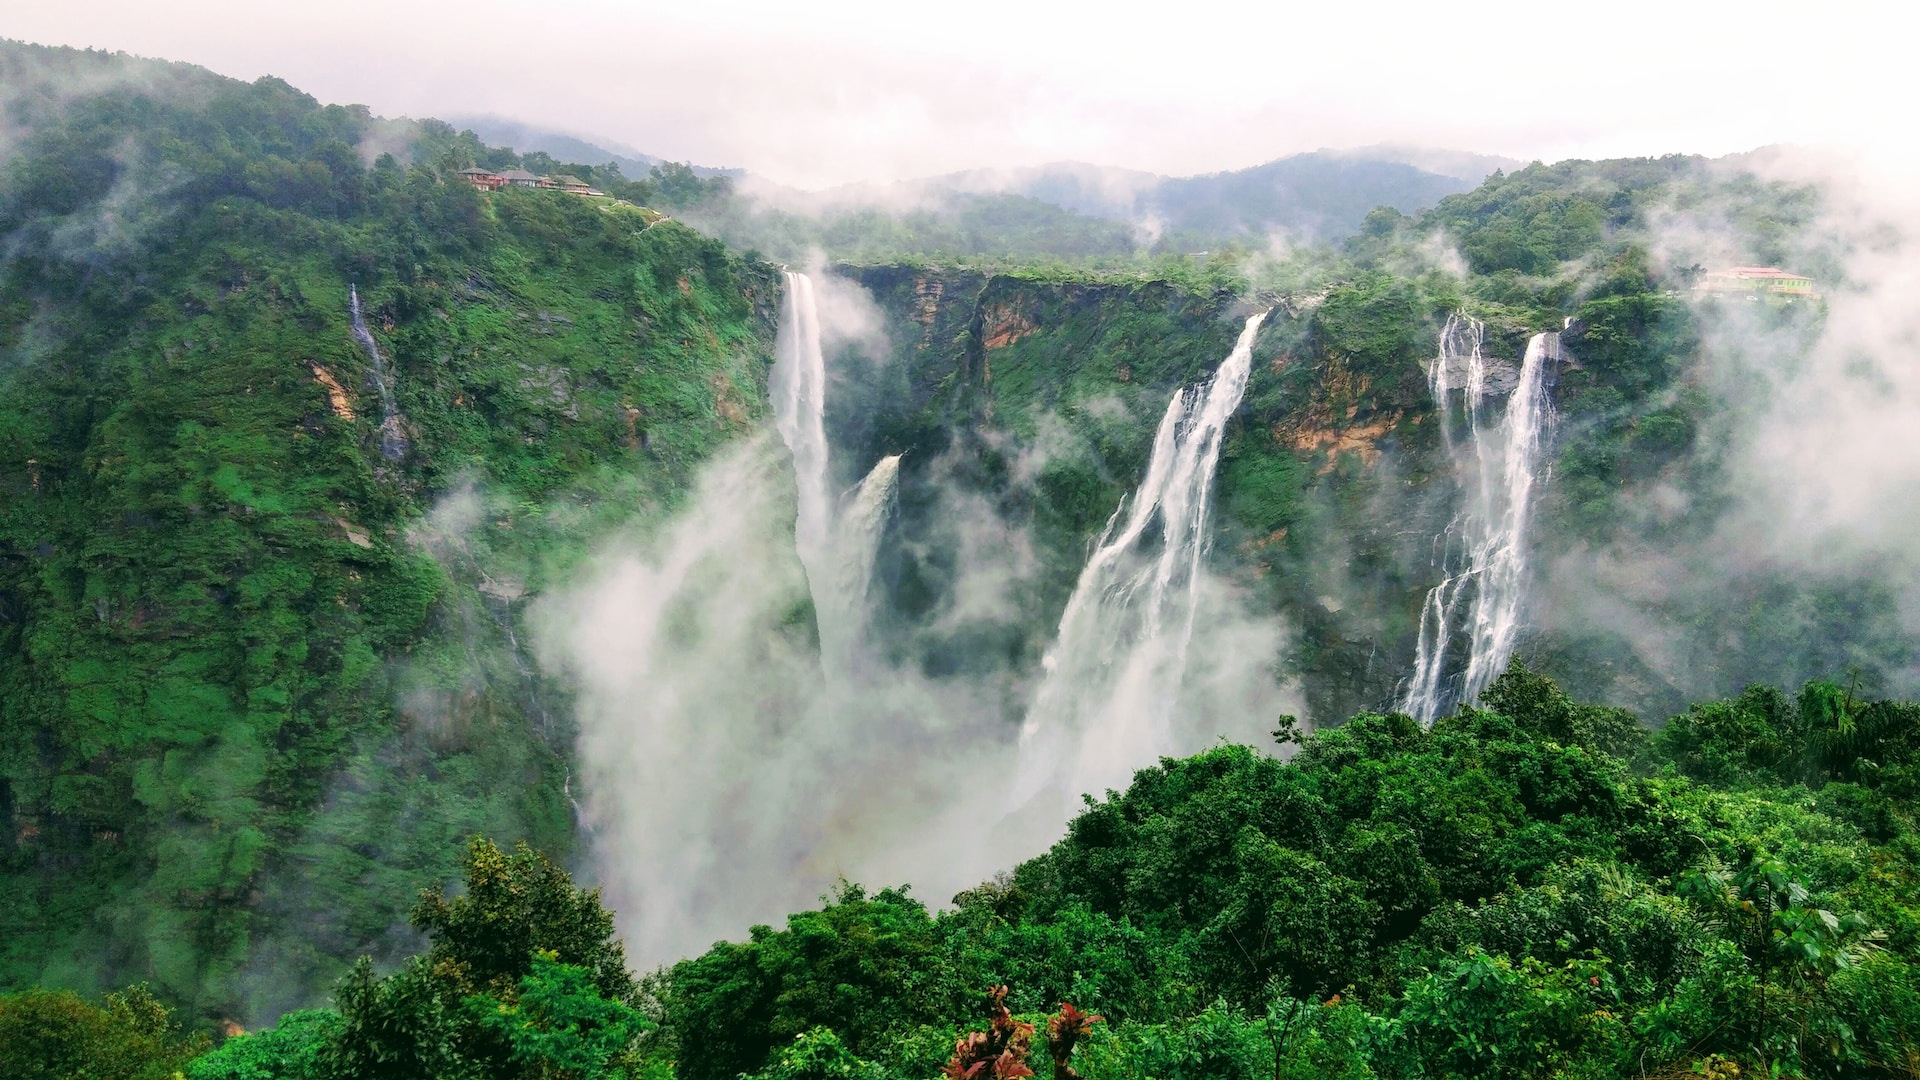 Kunchikal Falls- The Highest Waterfall in India